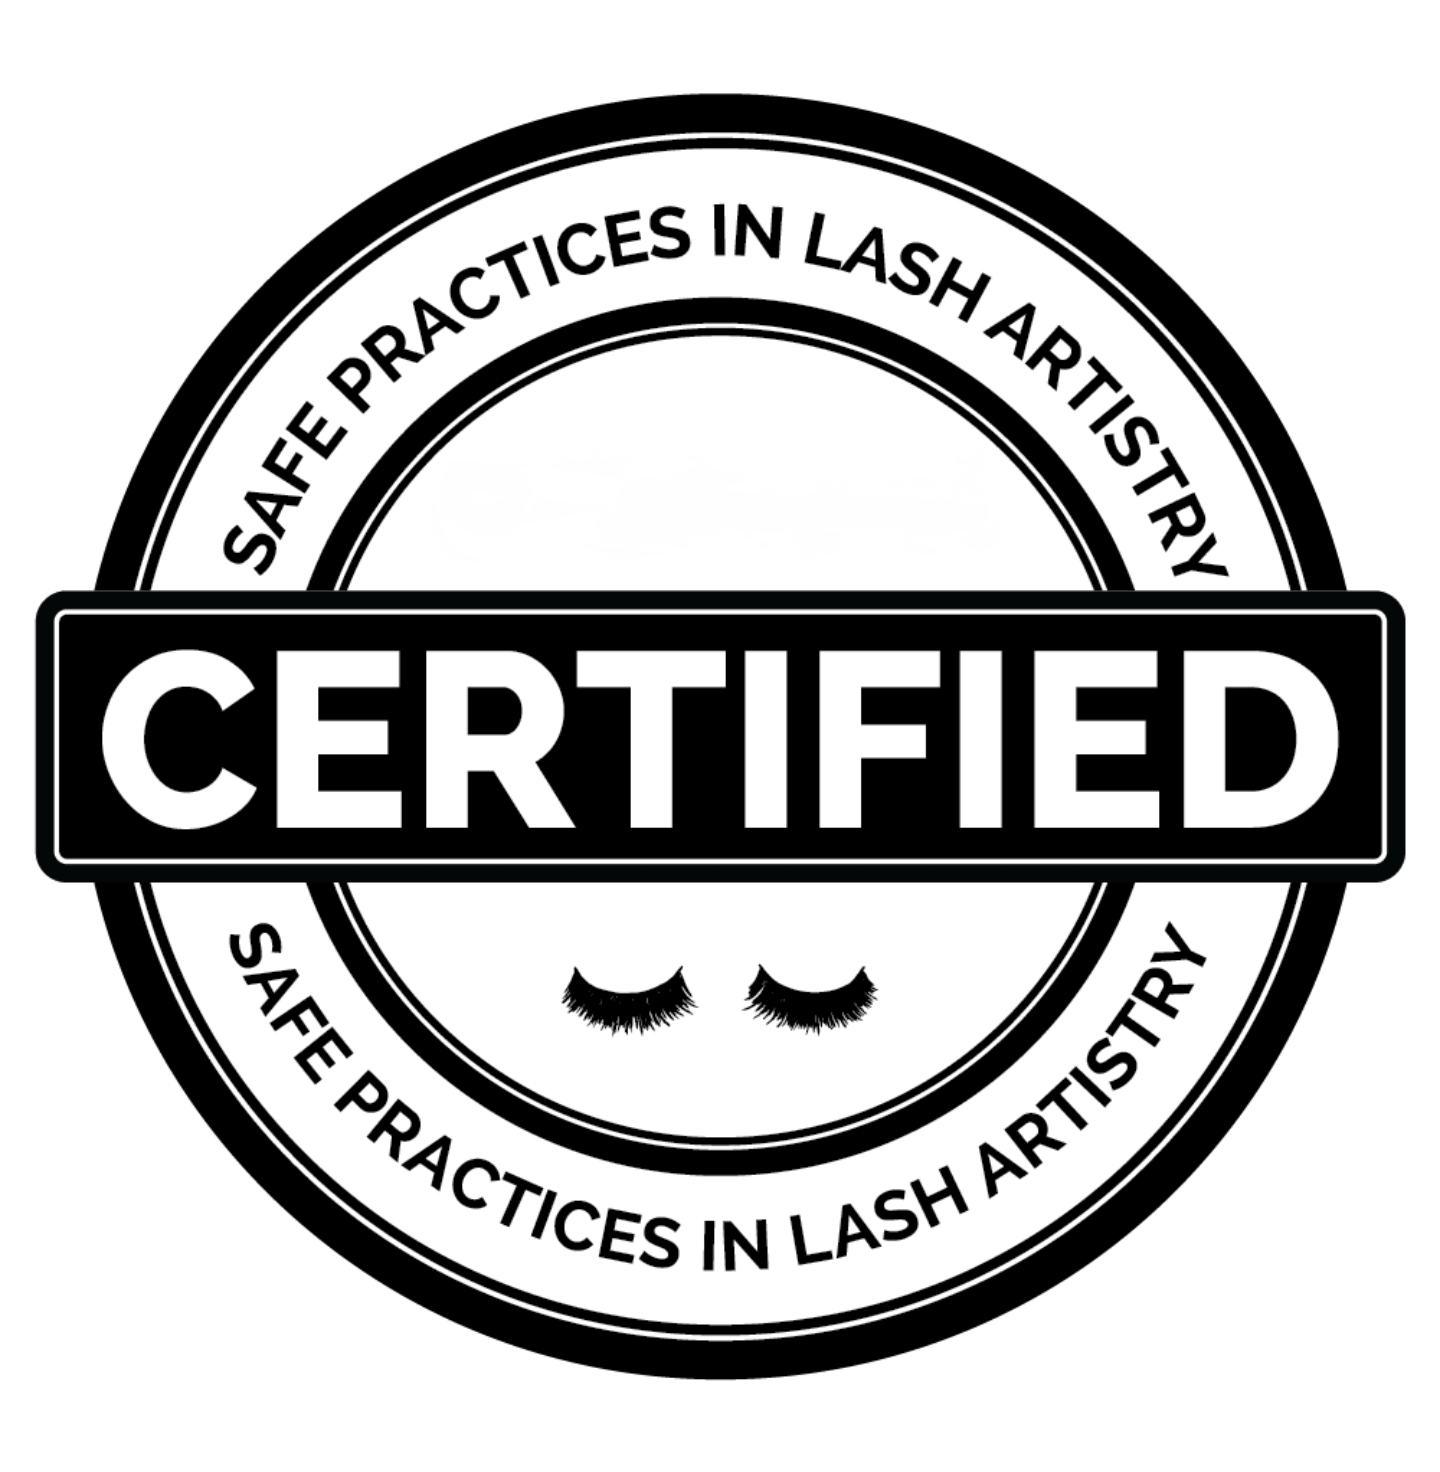 Eye Safety Certification from Leah Lynch